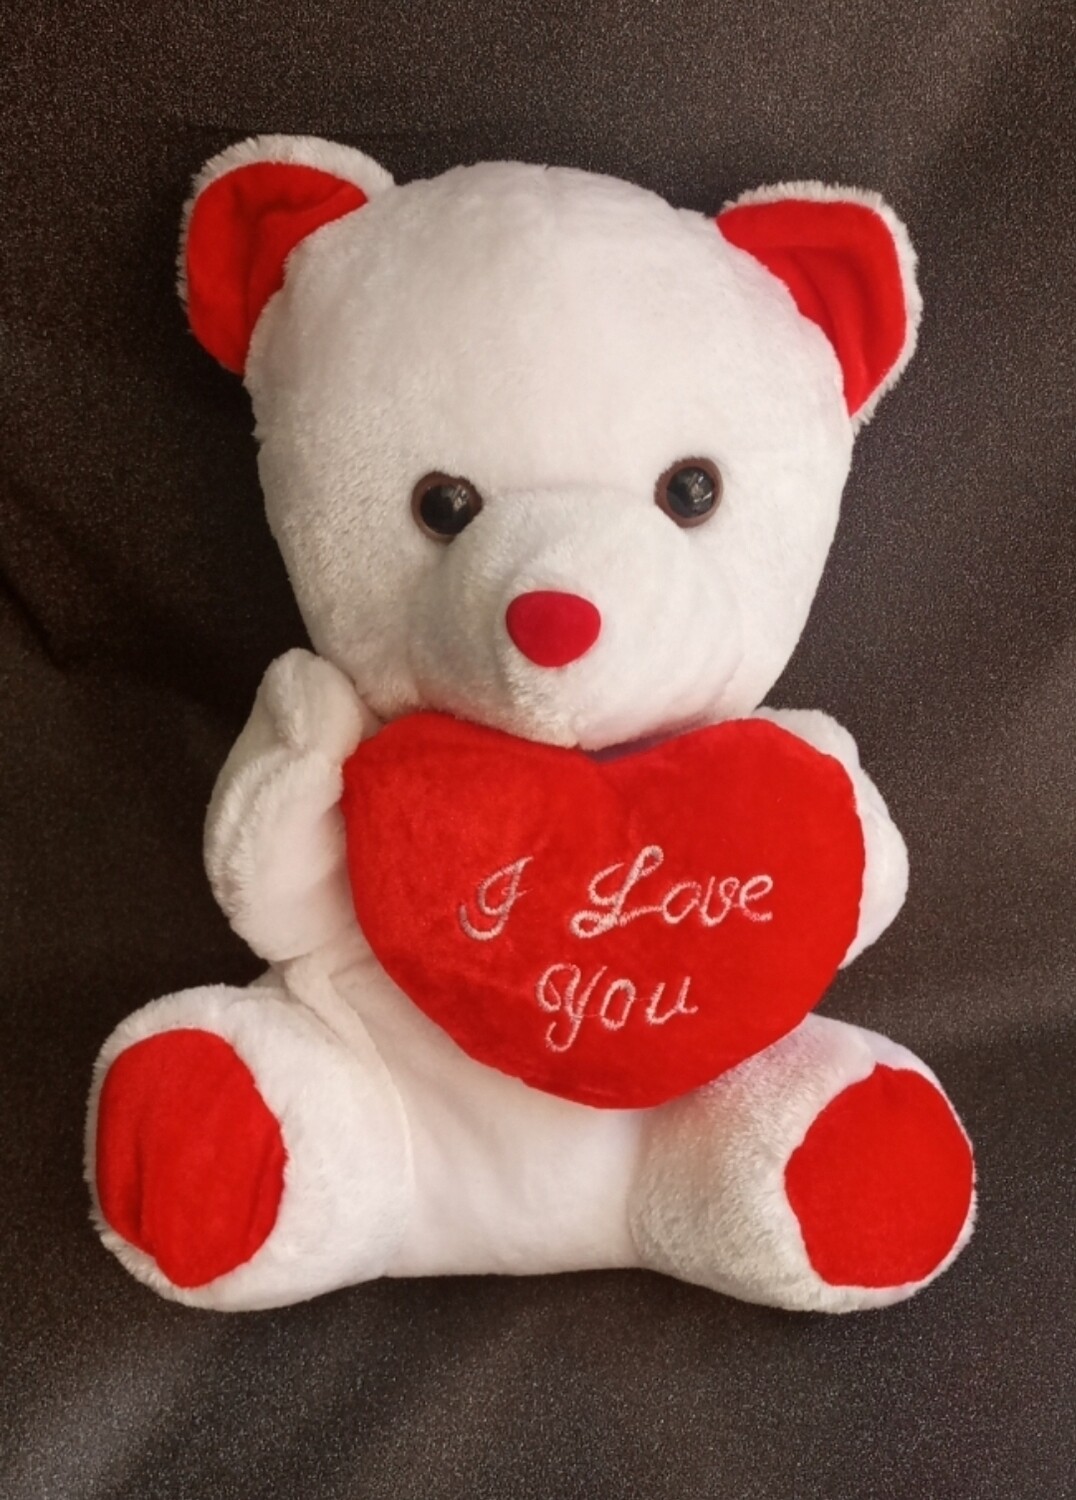 Valentine Teddy bear 40cm WHITE Valentines Day Gifts for Her Women Wife, Teddy Bear Stuffed Gifts for Kids, Christmas Birthday Gift for Her Girlfriend Fiancée from Boyfriend Husband